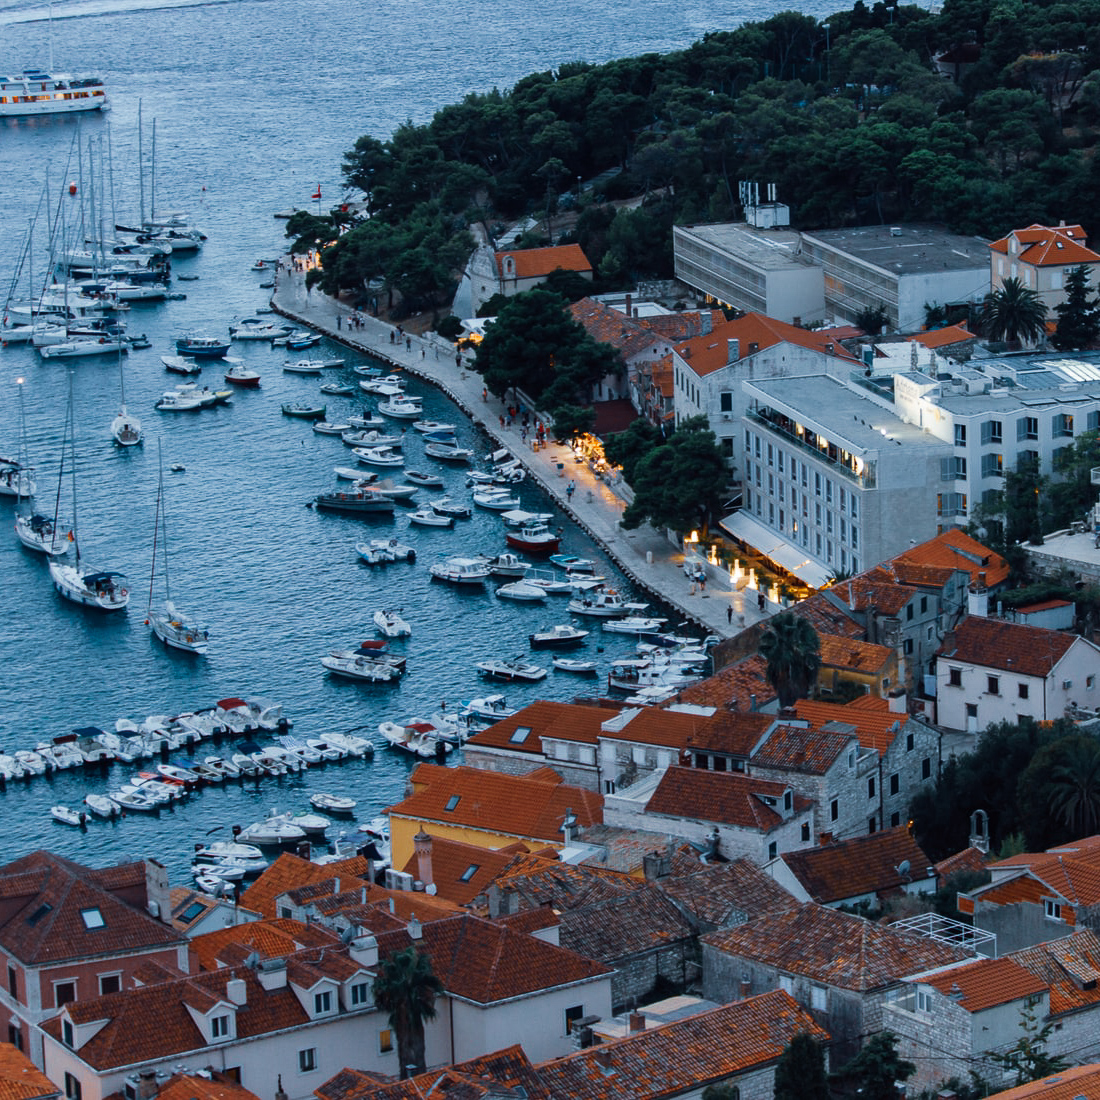 Marina filled with boats next to old Croatian buildings